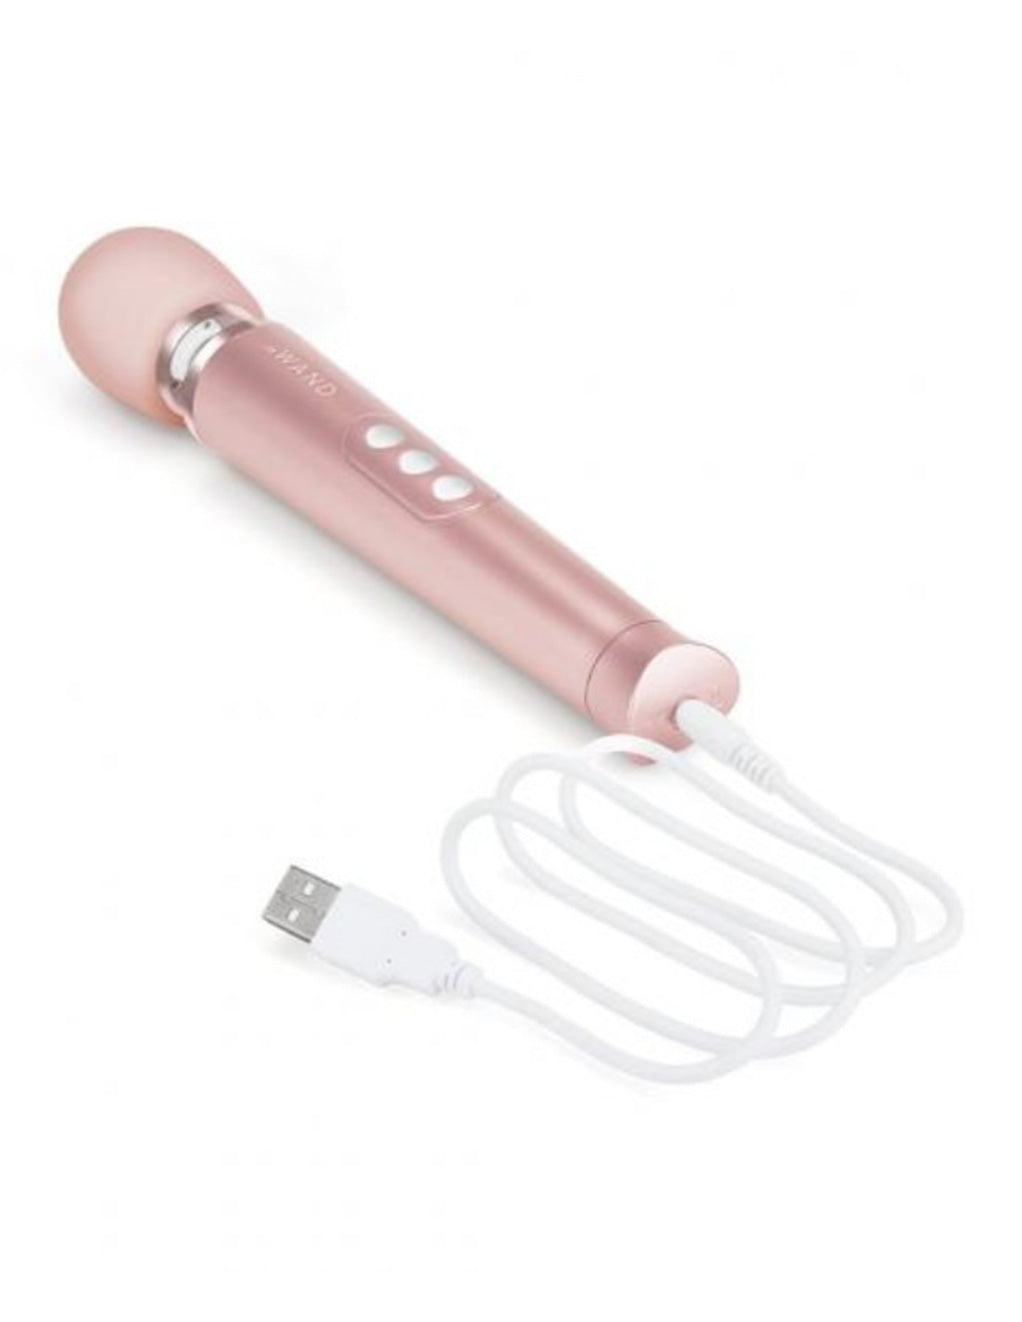 Le Wand Petite Rechargeable Massager Rose Gold Charging